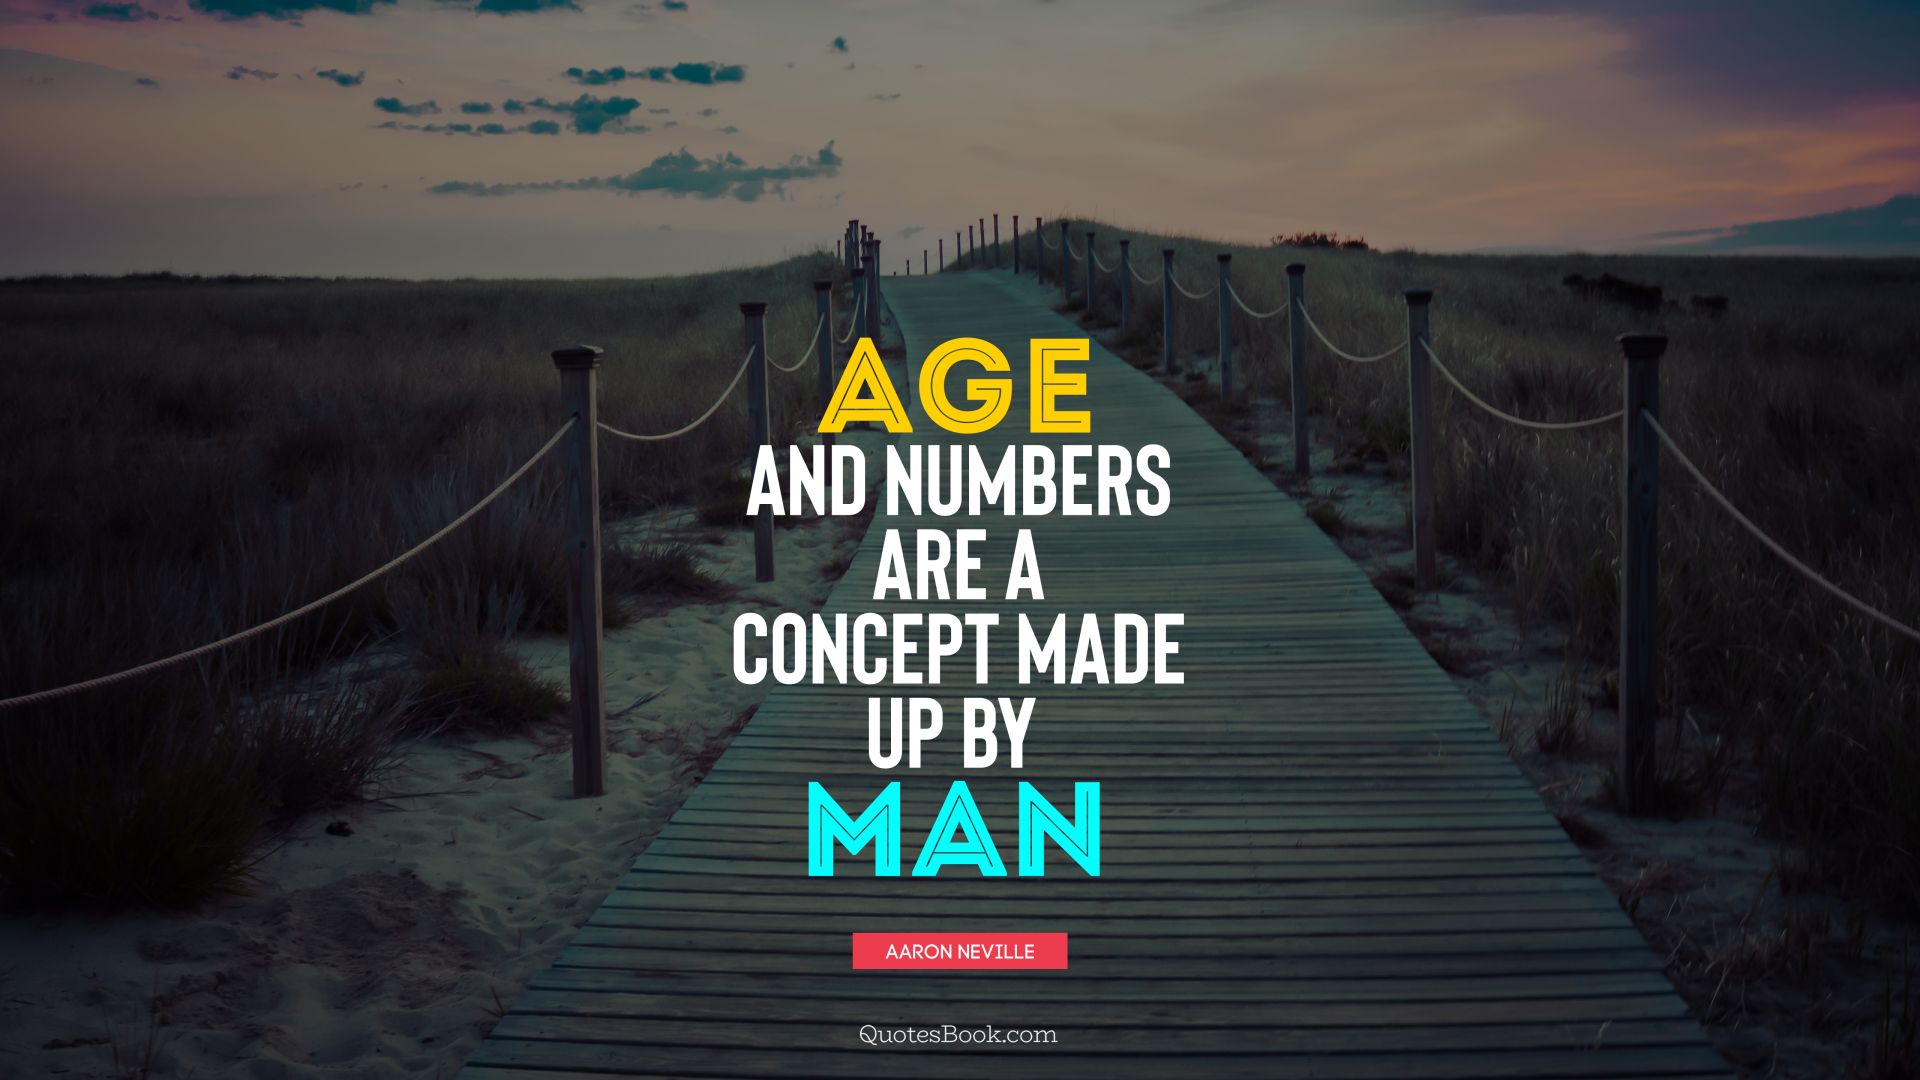 Age and numbers are a concept made up by man. - Quote by Aaron Neville